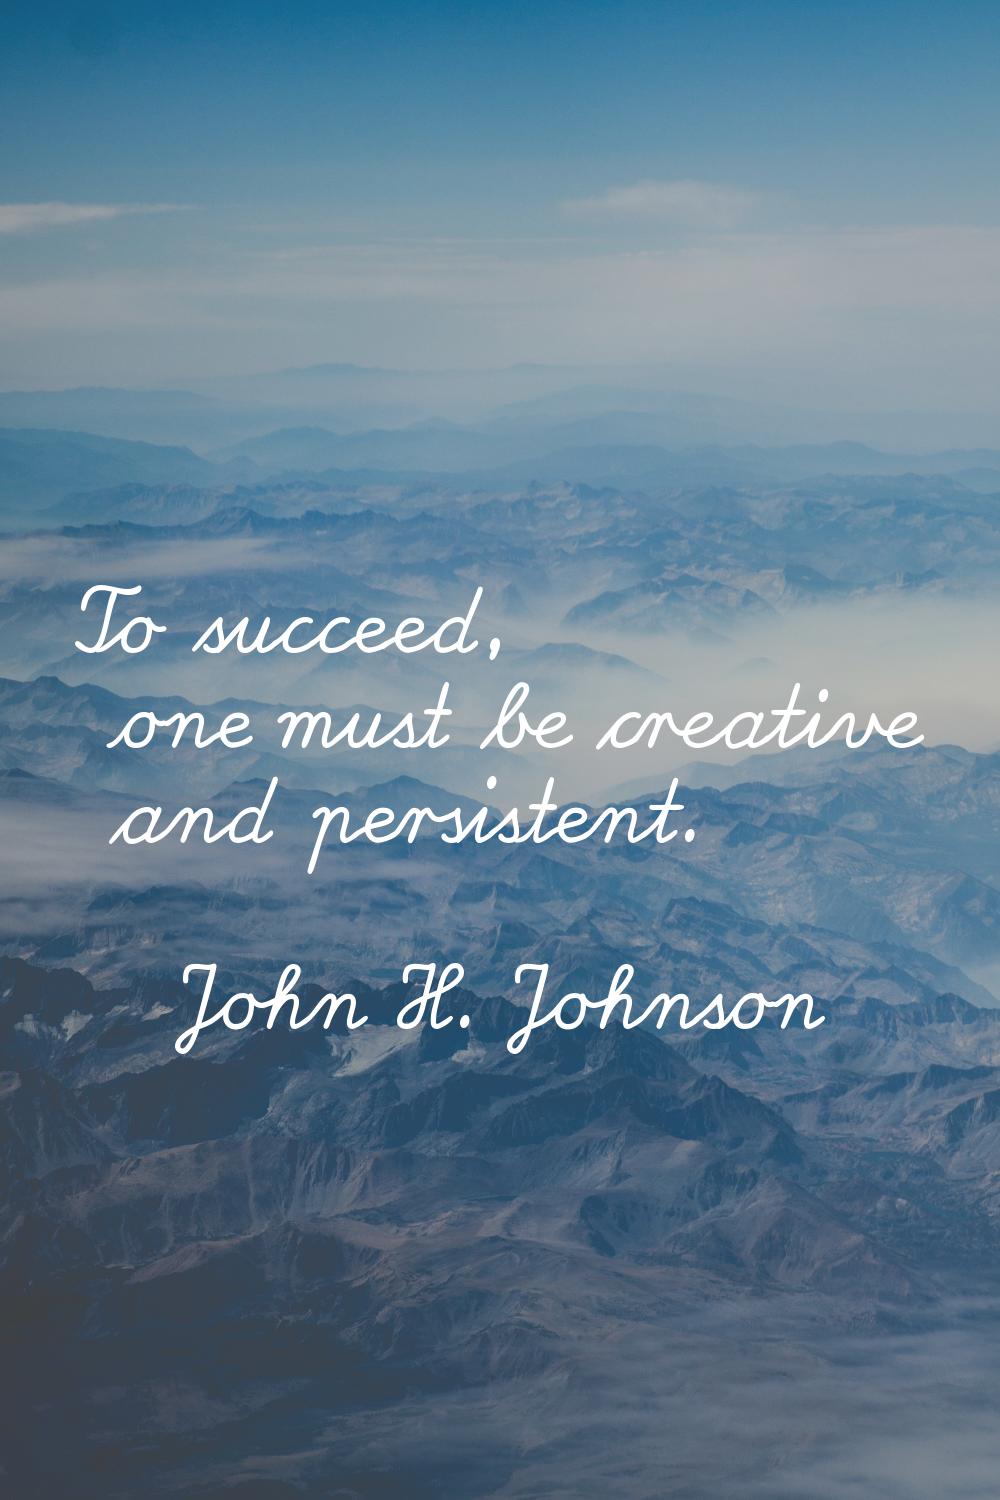 To succeed, one must be creative and persistent.